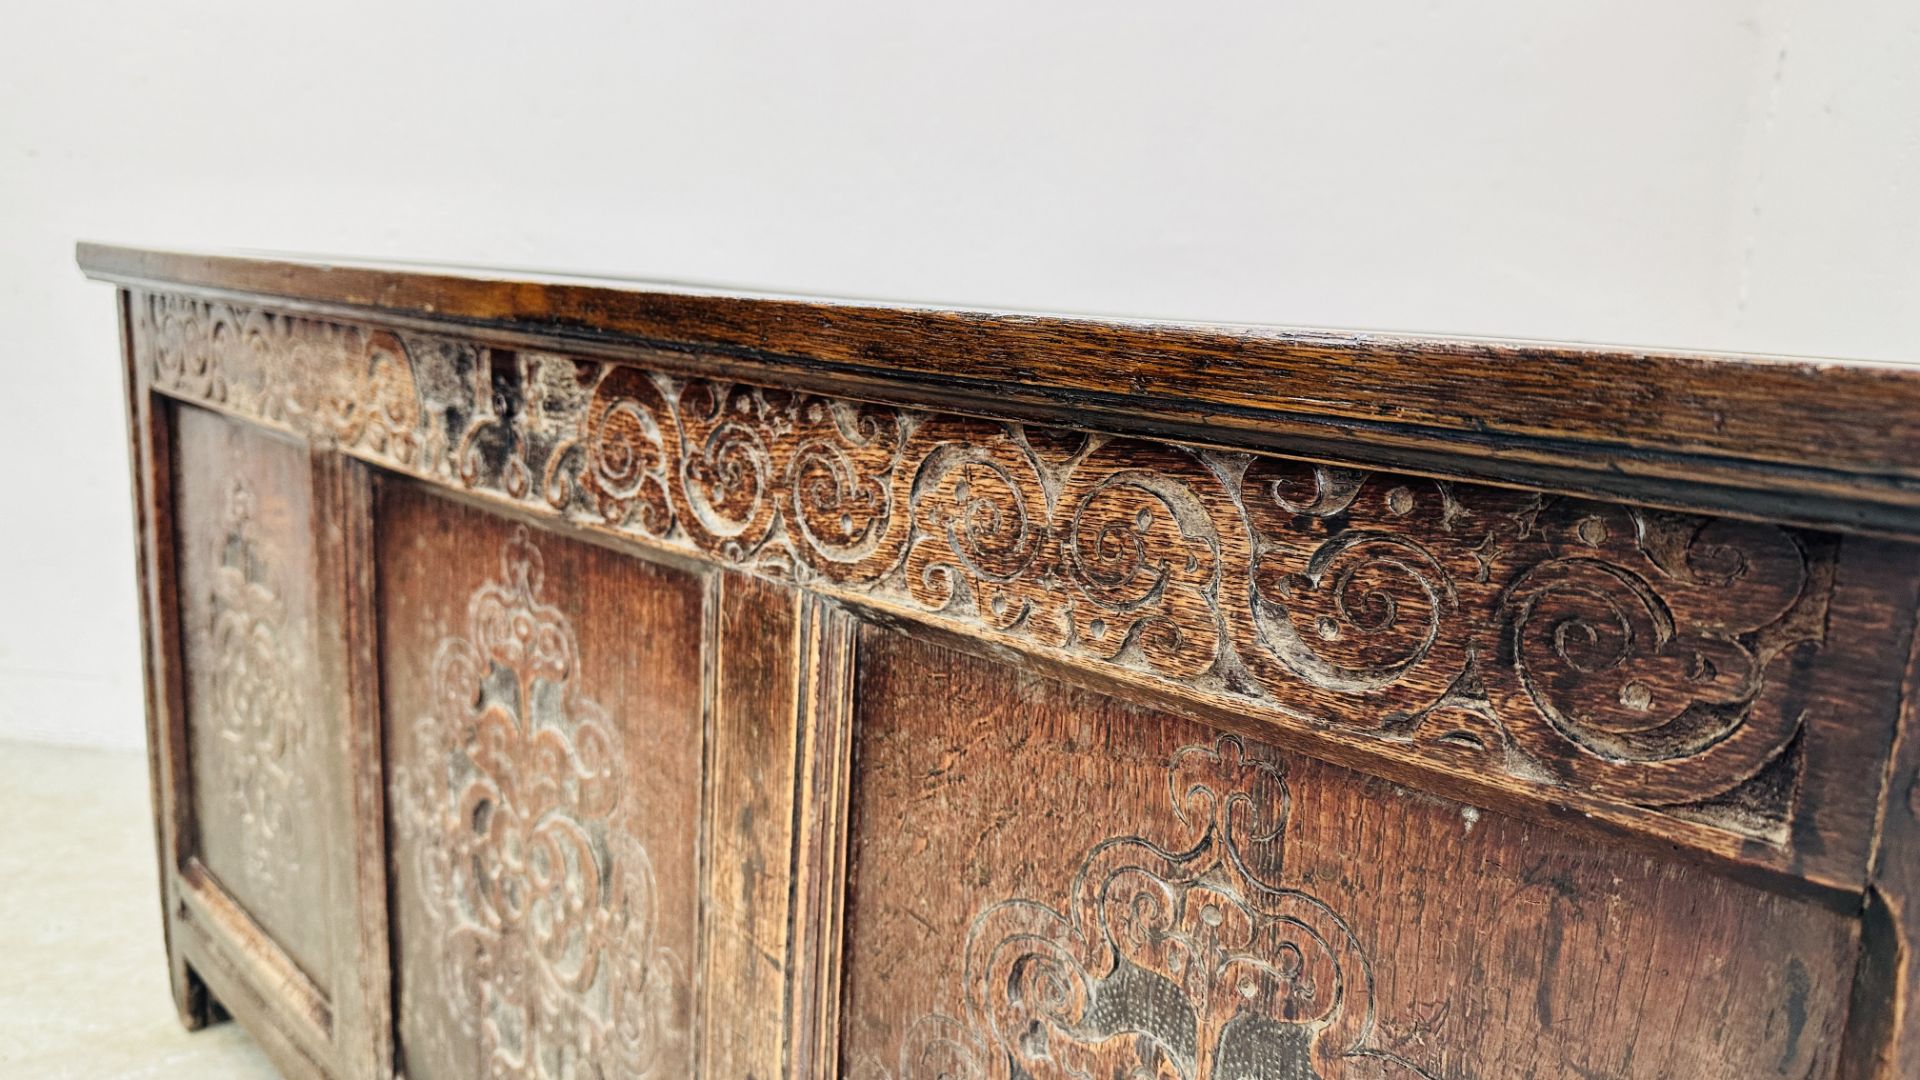 A C17th OAK COFFER, DATED 1686, WITH ALTERATIONS INCLUDING A NEW TOP, 134CM WIDE. - Image 5 of 17